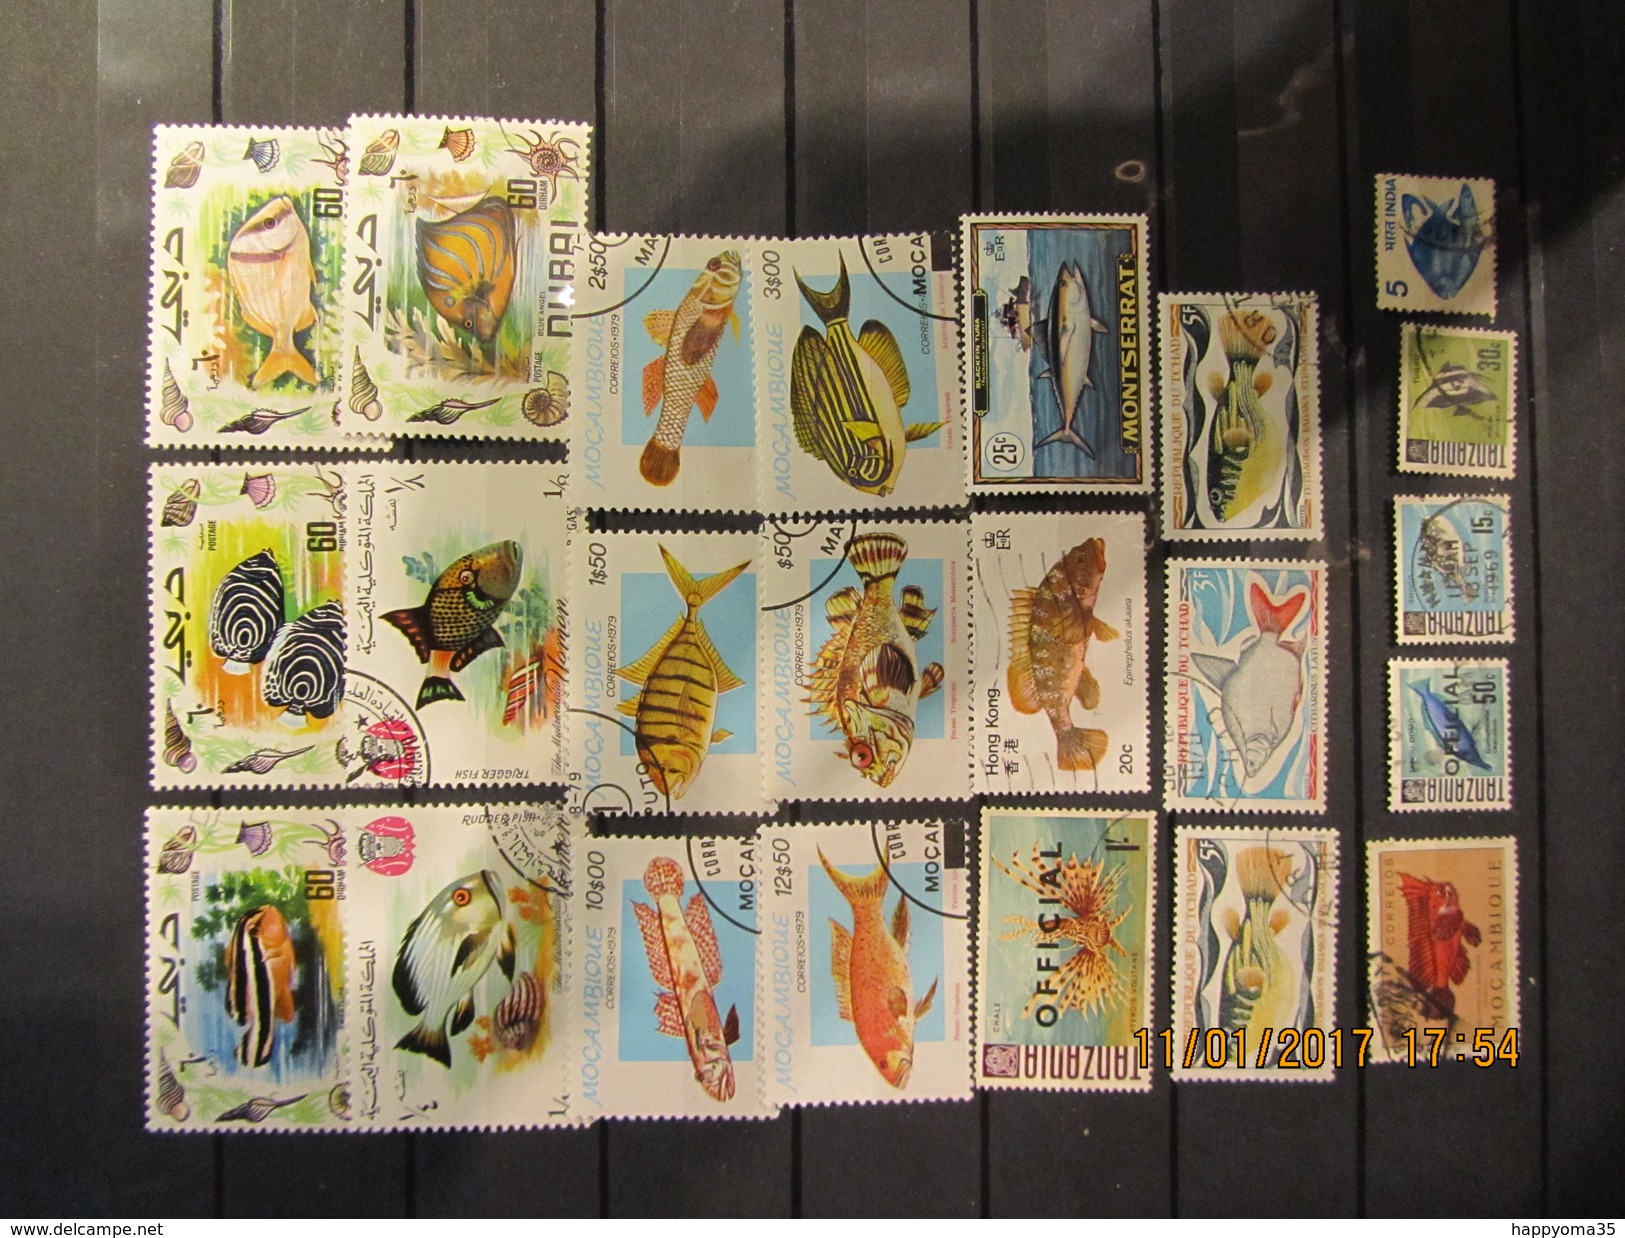 Fisch Mix Set Stamps Of Fish Poisson Pez Pesce Vis Small Selection Of Fine Used 212 - Fische